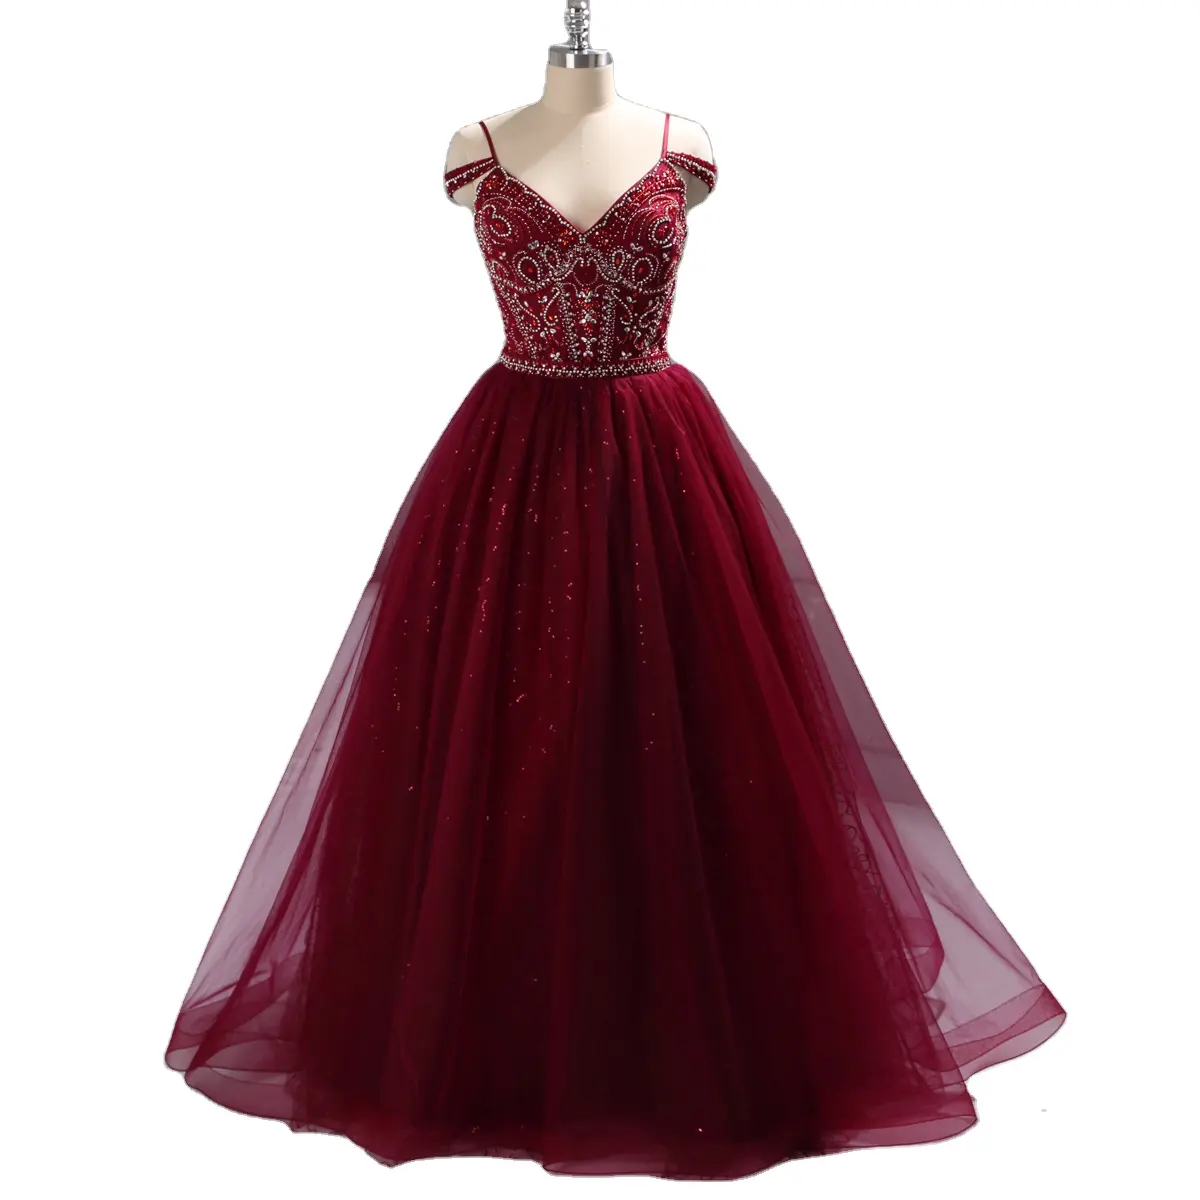 heavy embroidery beadings red tulle ball gown wedding dress